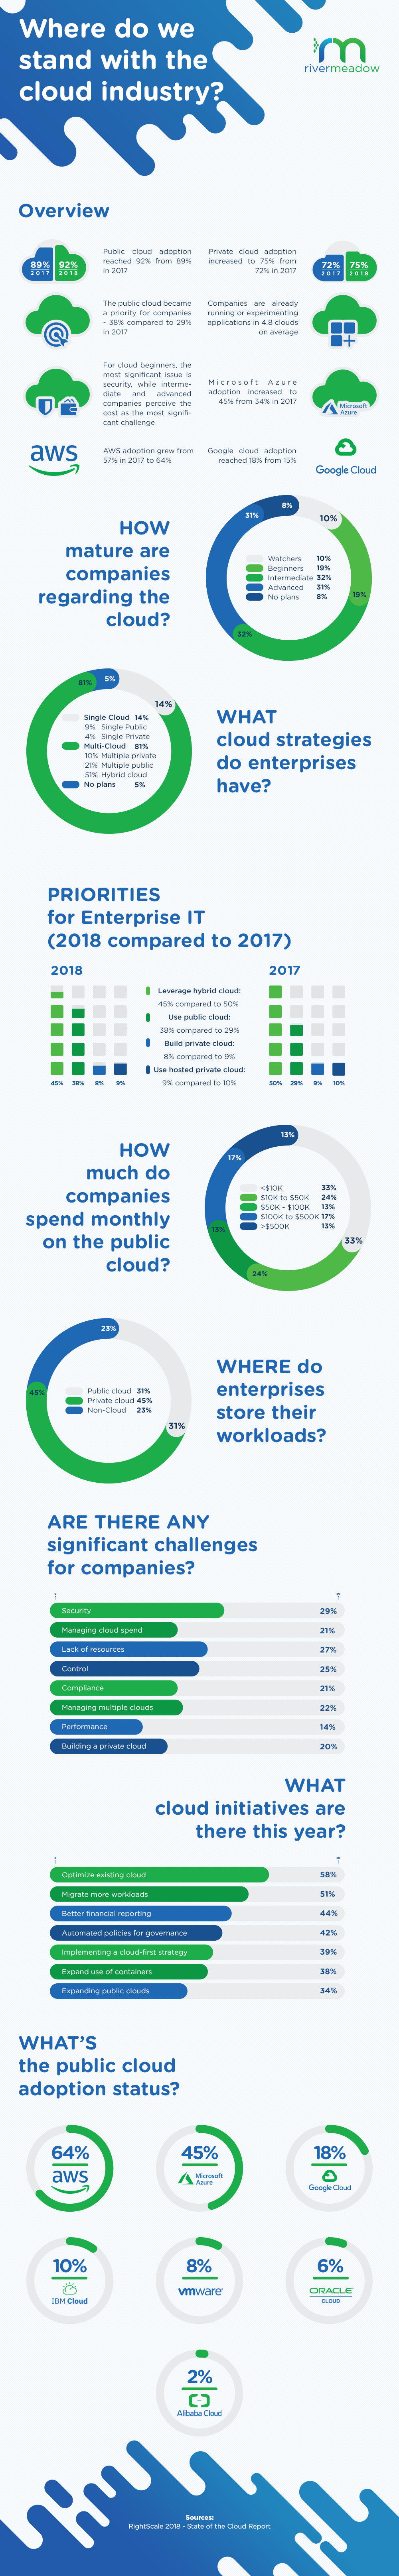 RightScale 2018 - State of the Cloud Report - Infographic